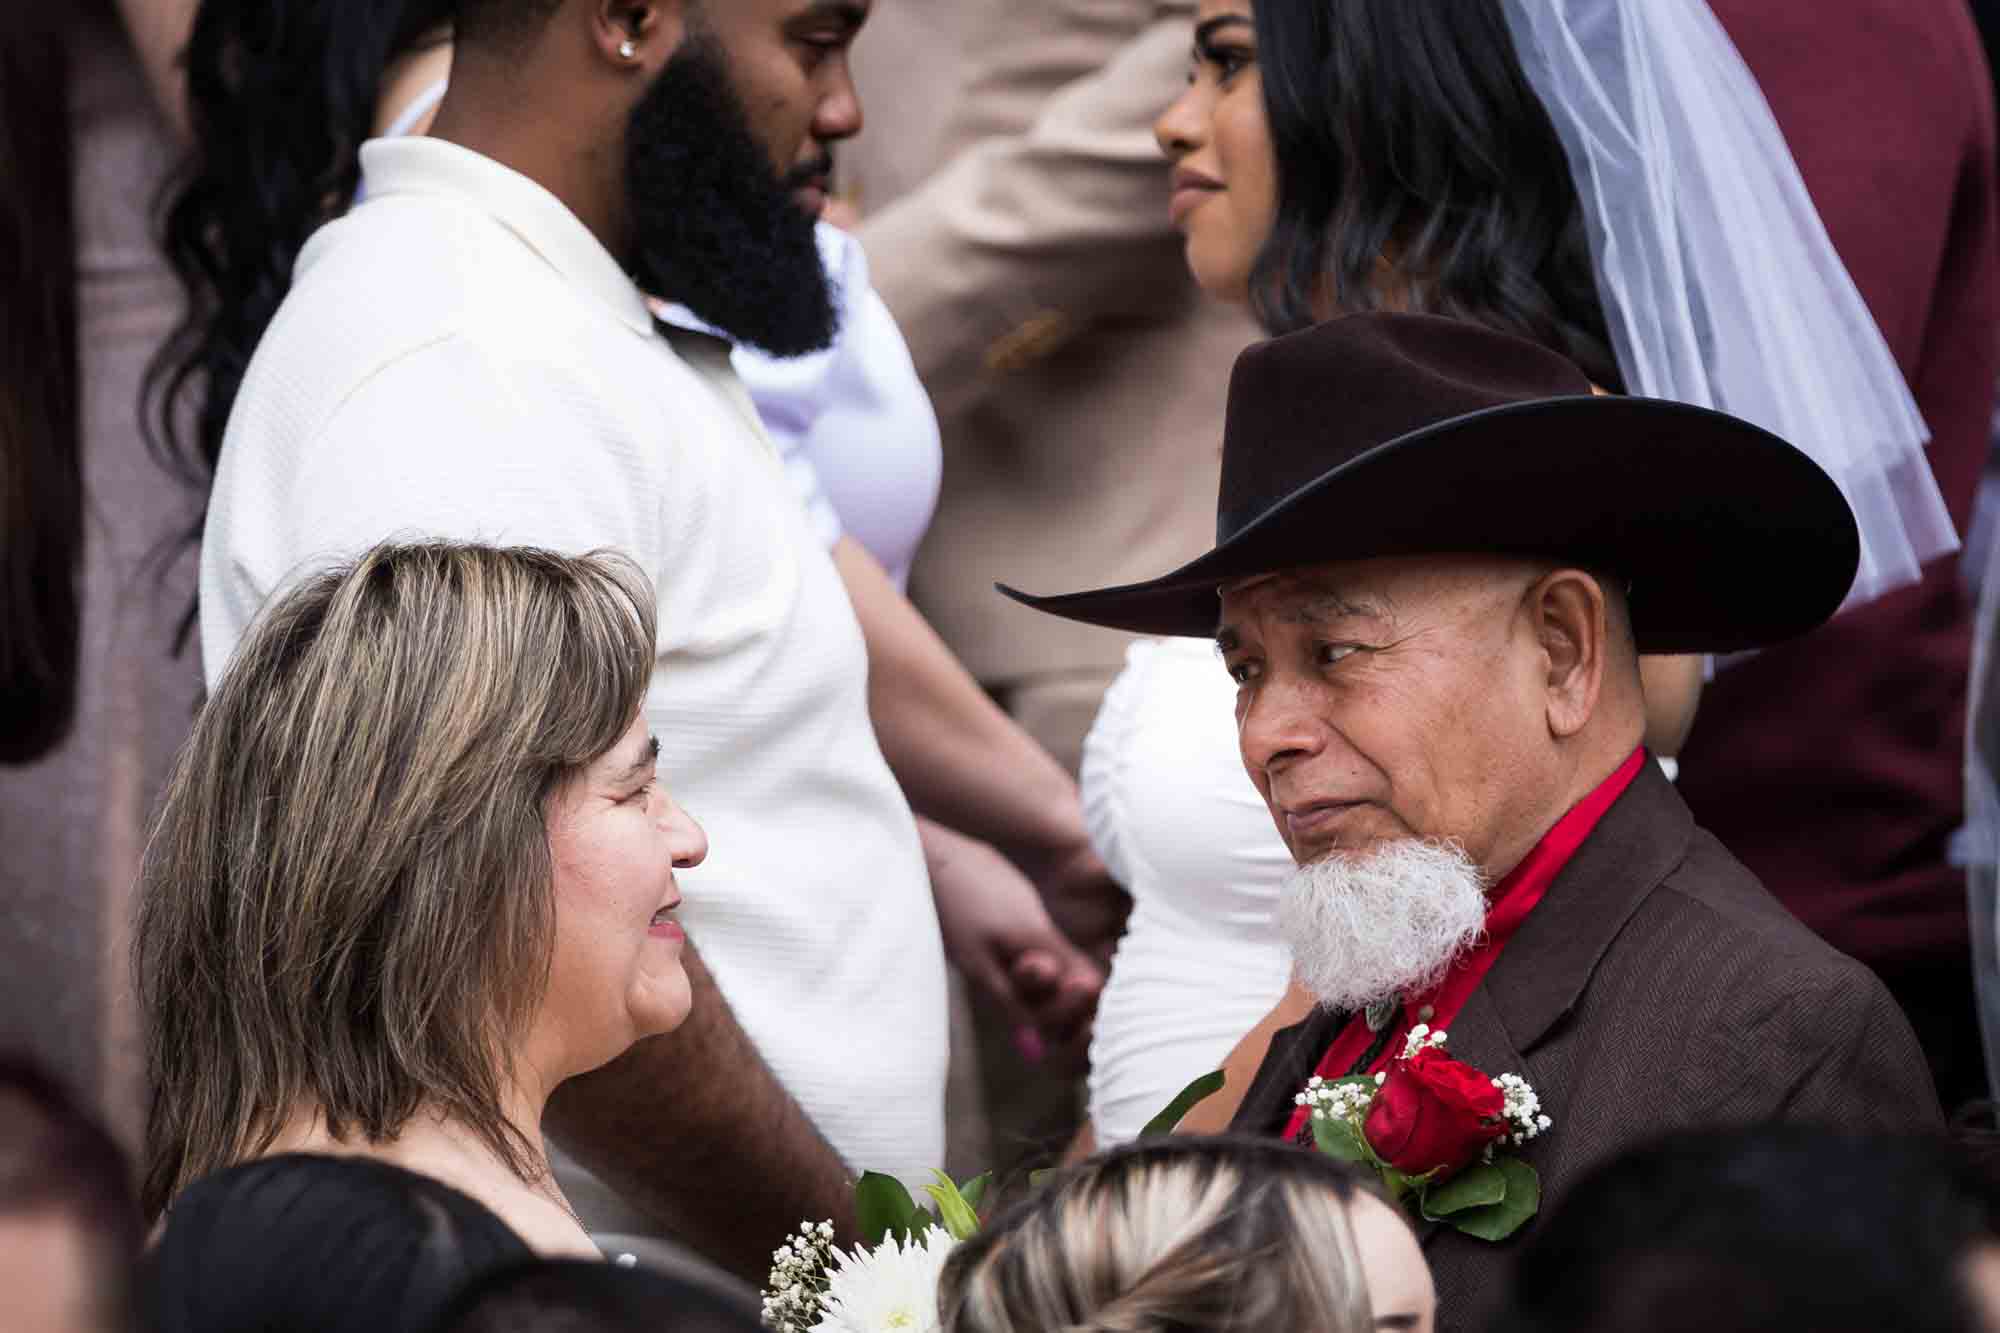 Older woman looking at older man wearing black cowboy hat for an article on the Bexar county mass wedding event